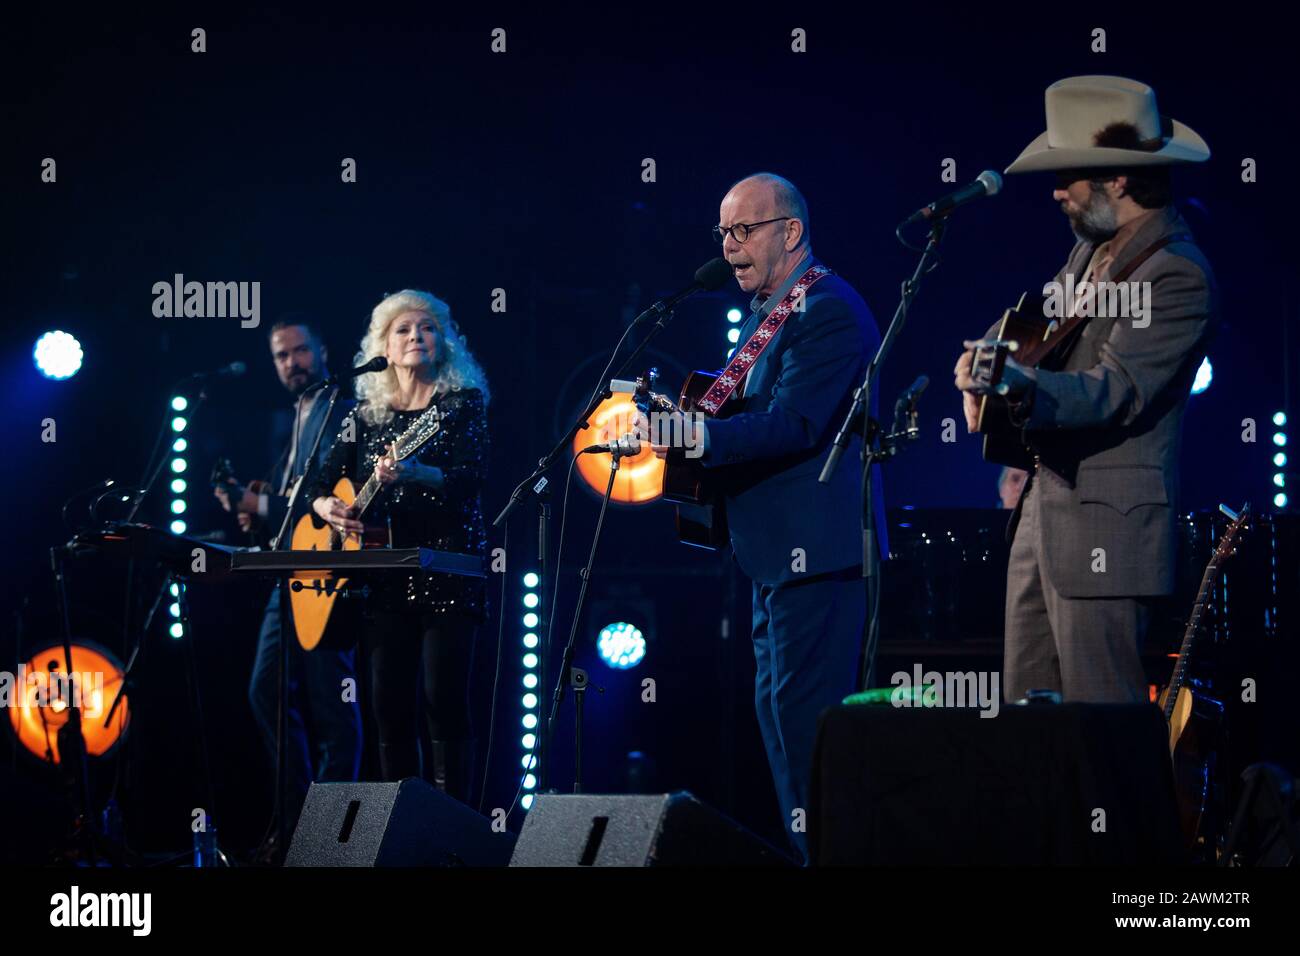 Oslo, Norway. 08th, February 2020. Judy Collins and Jonas Fjeld perform a live concert with the backing band Chatham County Line at Den Norske Opera in Oslo. (Photo credit: Gonzales Photo - Tord Litleskare). Stock Photo